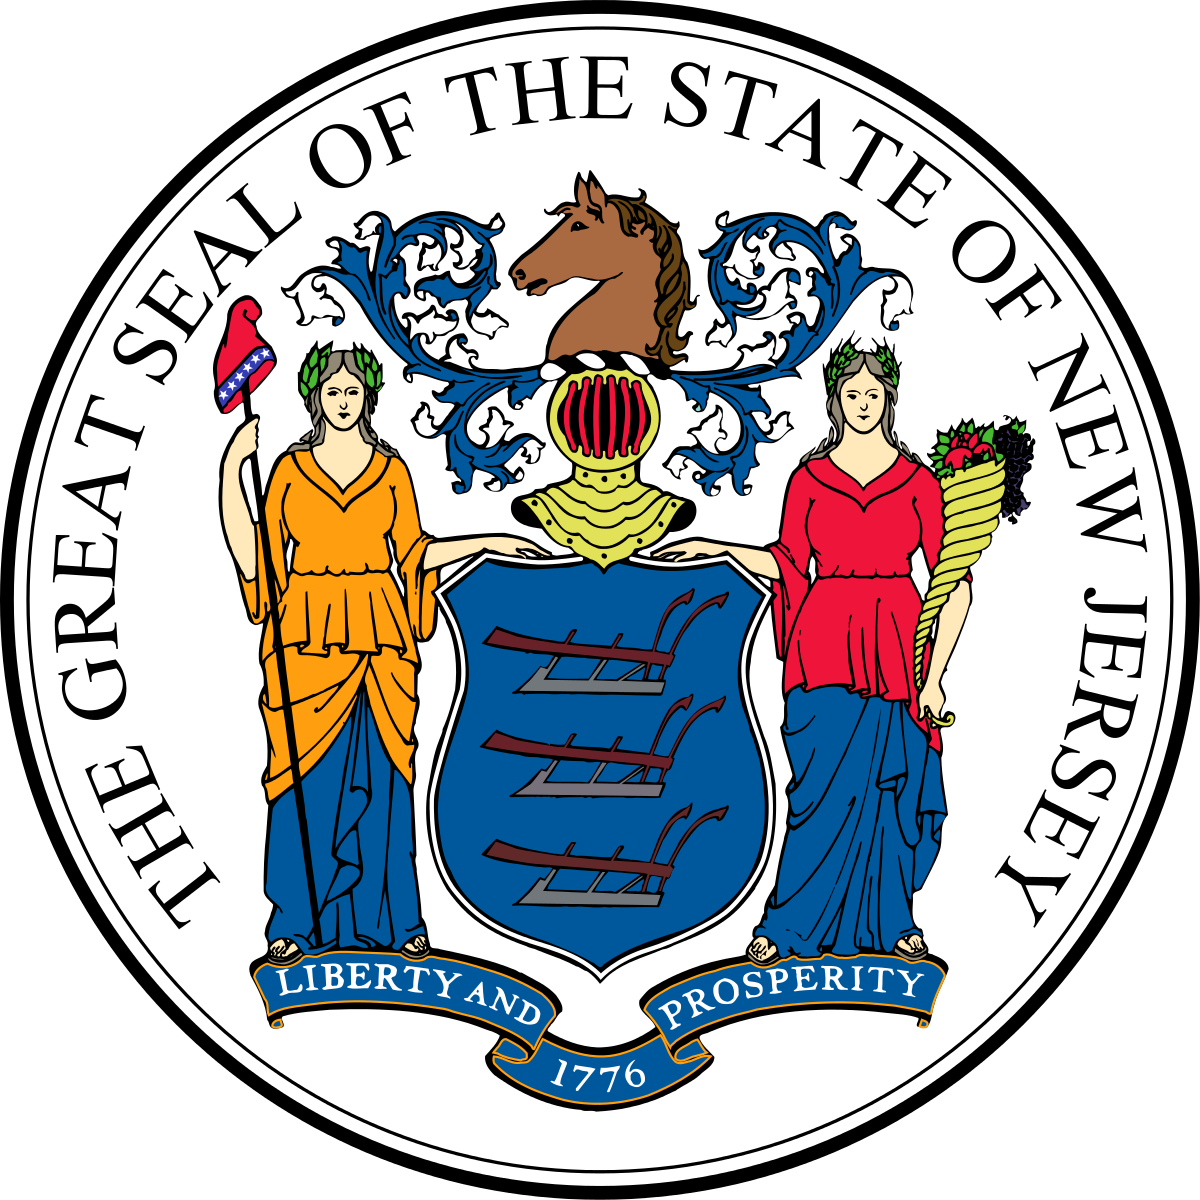 The 2017 New Jersey Gubernatorial Elections